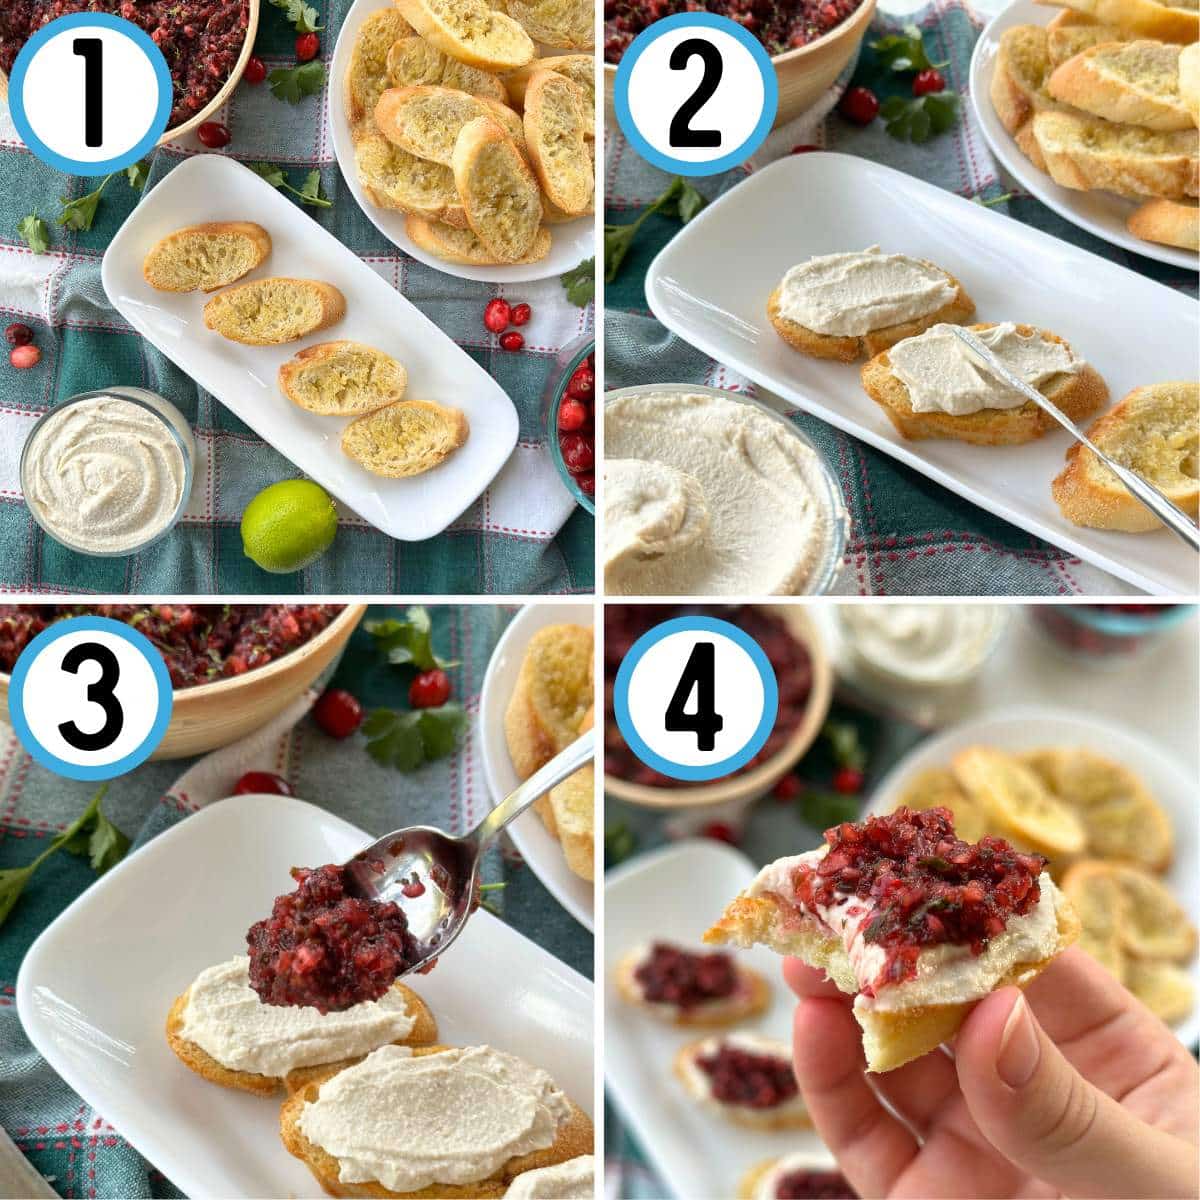 Step-by-step guide to assembling cranberry crostini. 1. 4 crostini on a serving platter. 2. Spreading cream cheese over crostini. 3. Spooning salsa over the cream cheese. 4. Bite taken out of crostini appetizer.